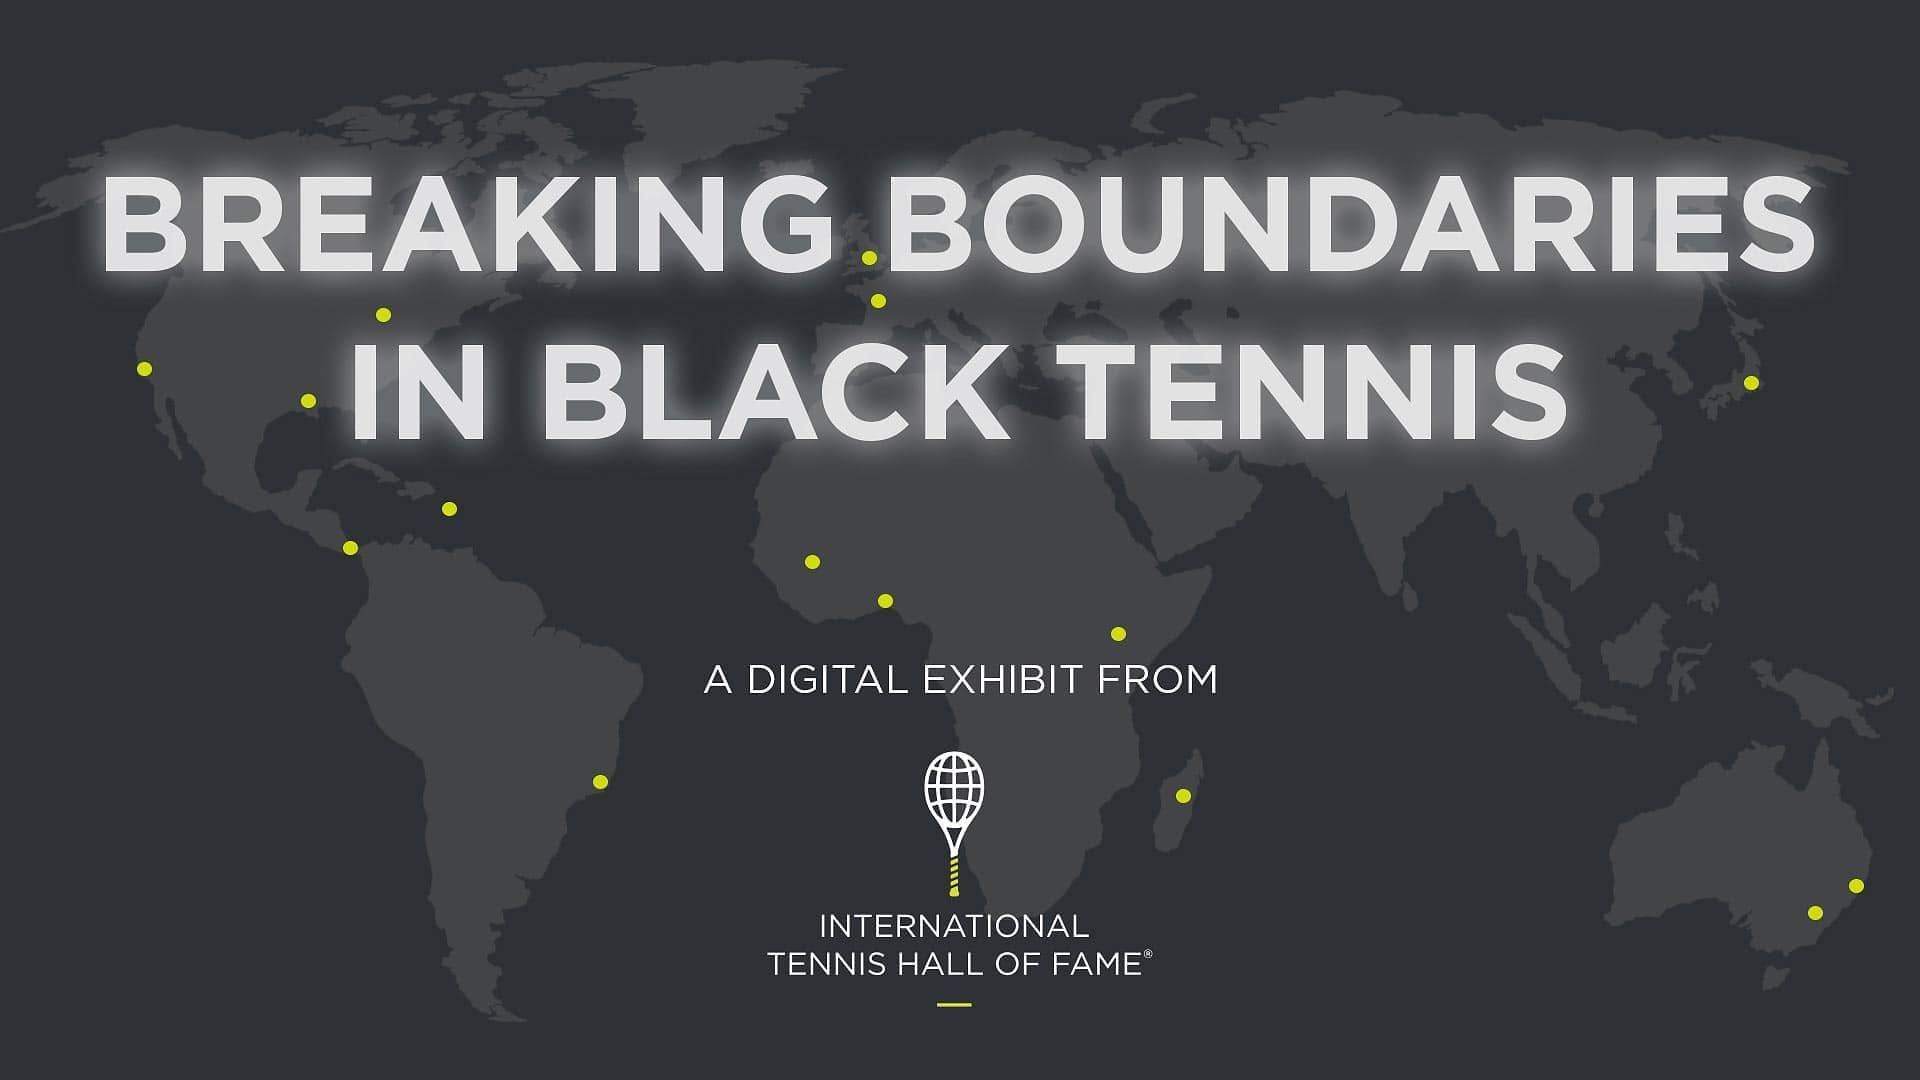 A new International Tennis Hall of Fame exhibit marks Black History Month.